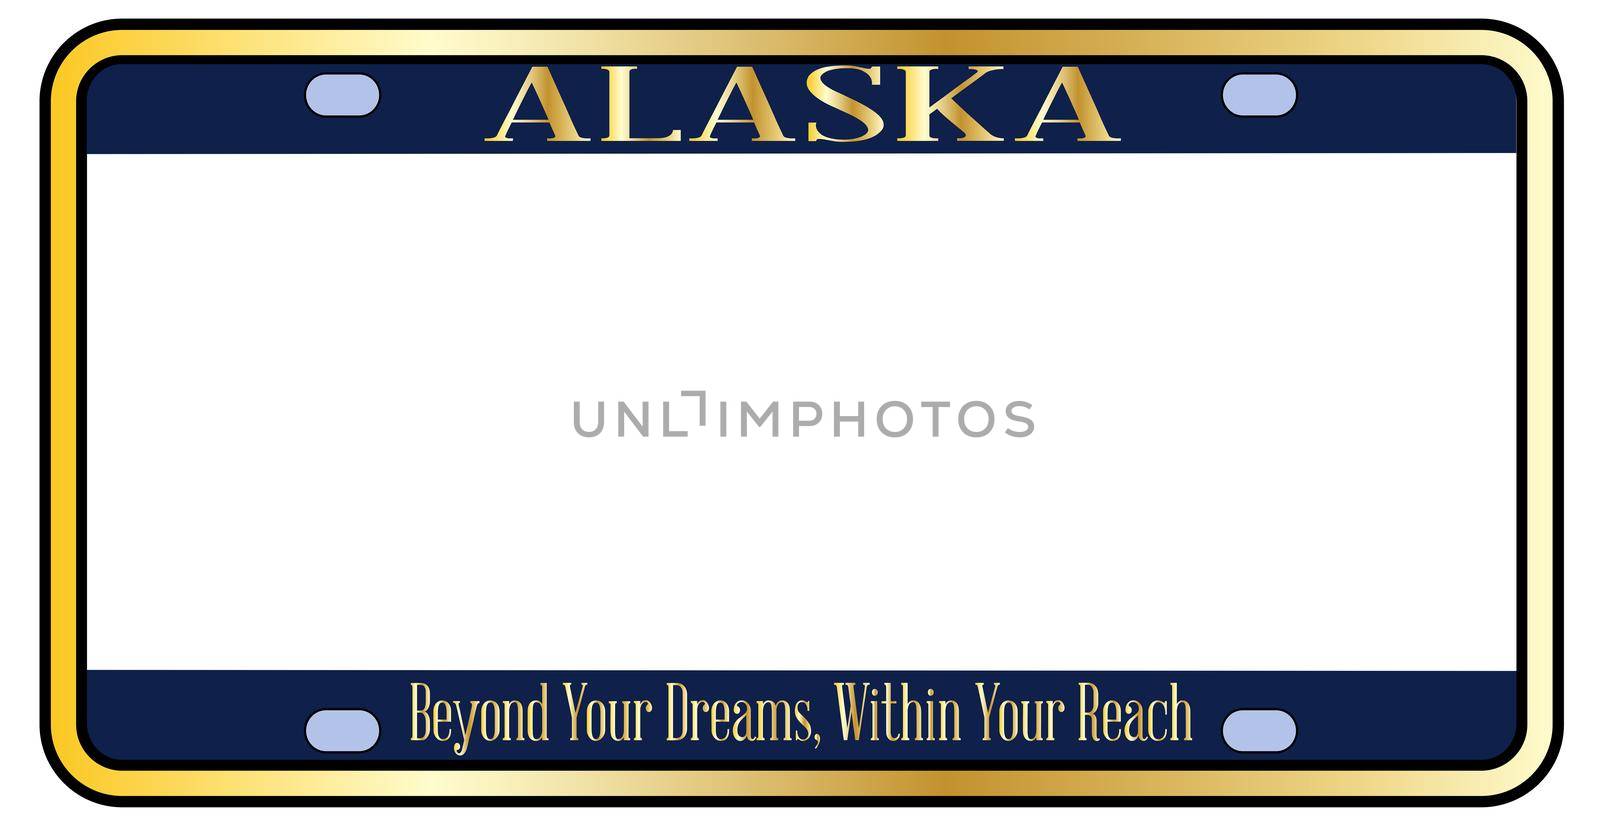 Blank Alaska state license plate in the colors of the state flag over a white background